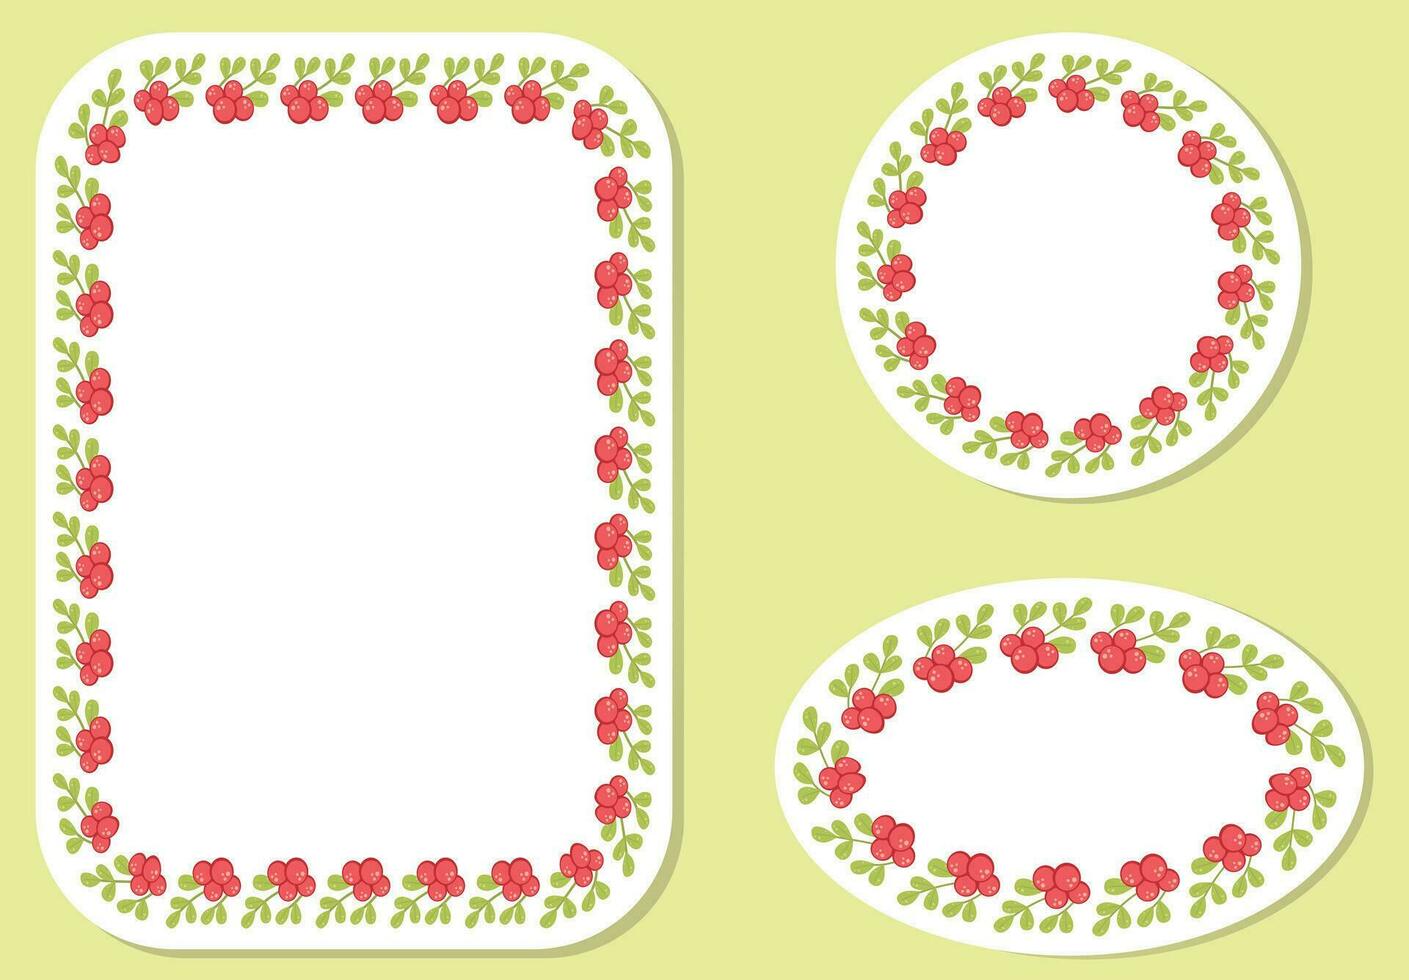 Set of 3 Decorative Wreaths with Branches, Berries, and Leaves. Vector Illustration. Frames, Circles, Square, and Oval.